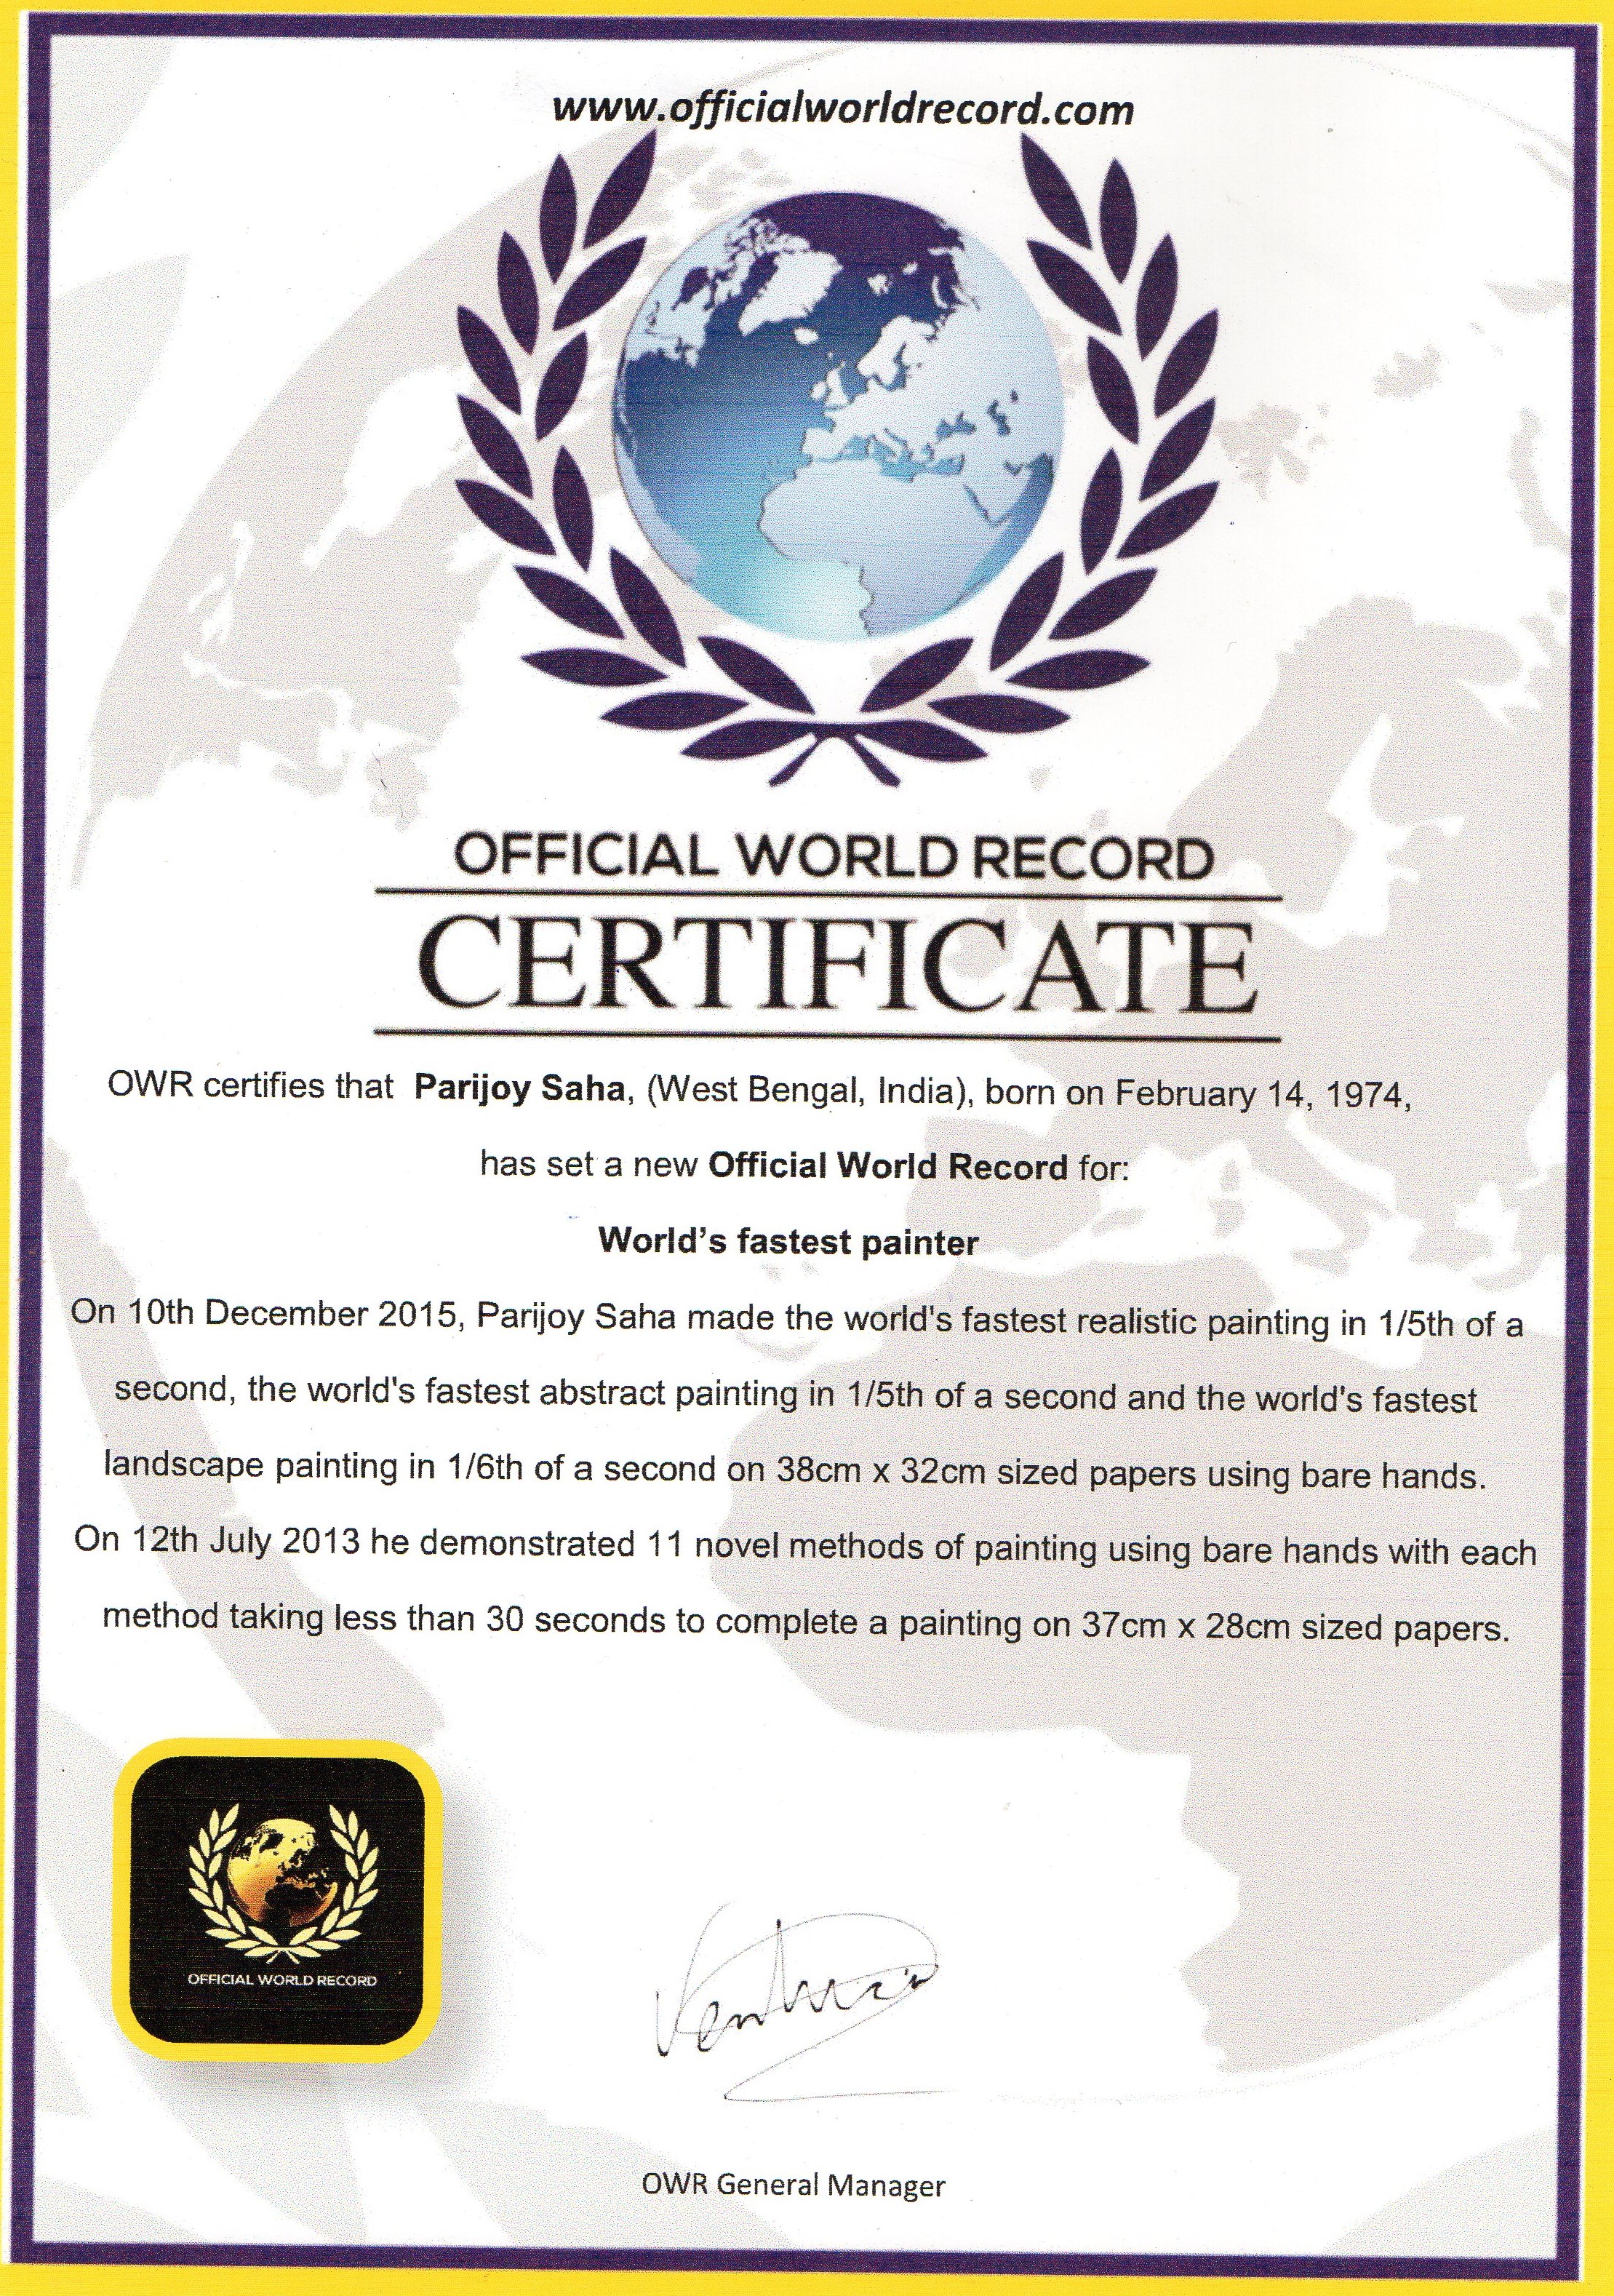 Official World Record (Spain) World's fastest painter certificate